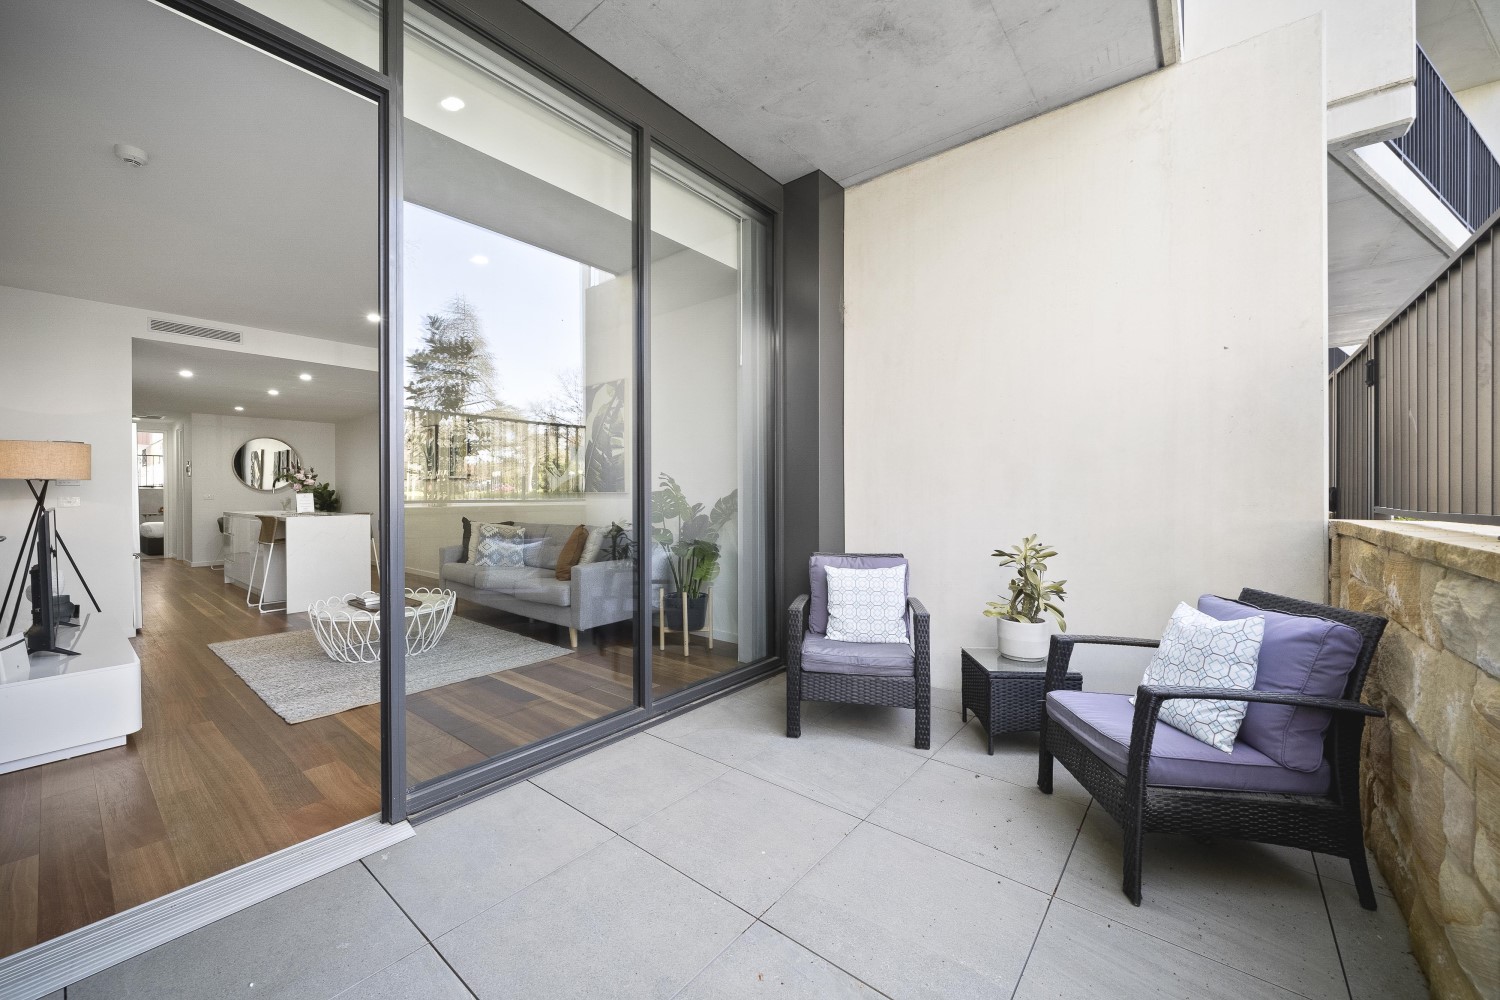 Patio - One Bedroom Apartment - Founders Lane Apartments - Canberra - Urban Rest